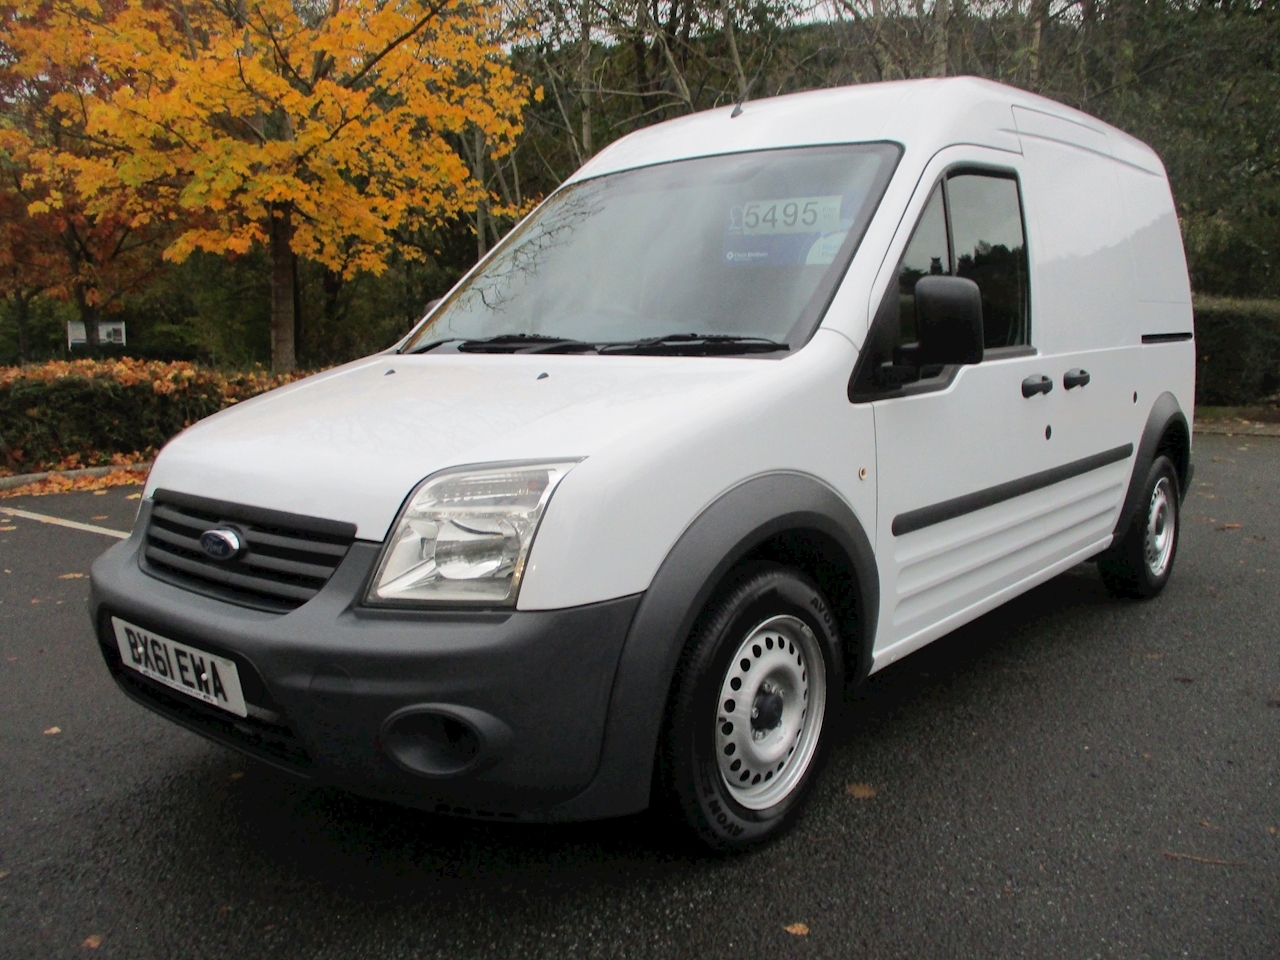 Transit Connect 1.8 TDCi T230 High Roof 4dr Diesel Manual LWB DPF (89 bhp) High Roof 1.8 Manual Diesel